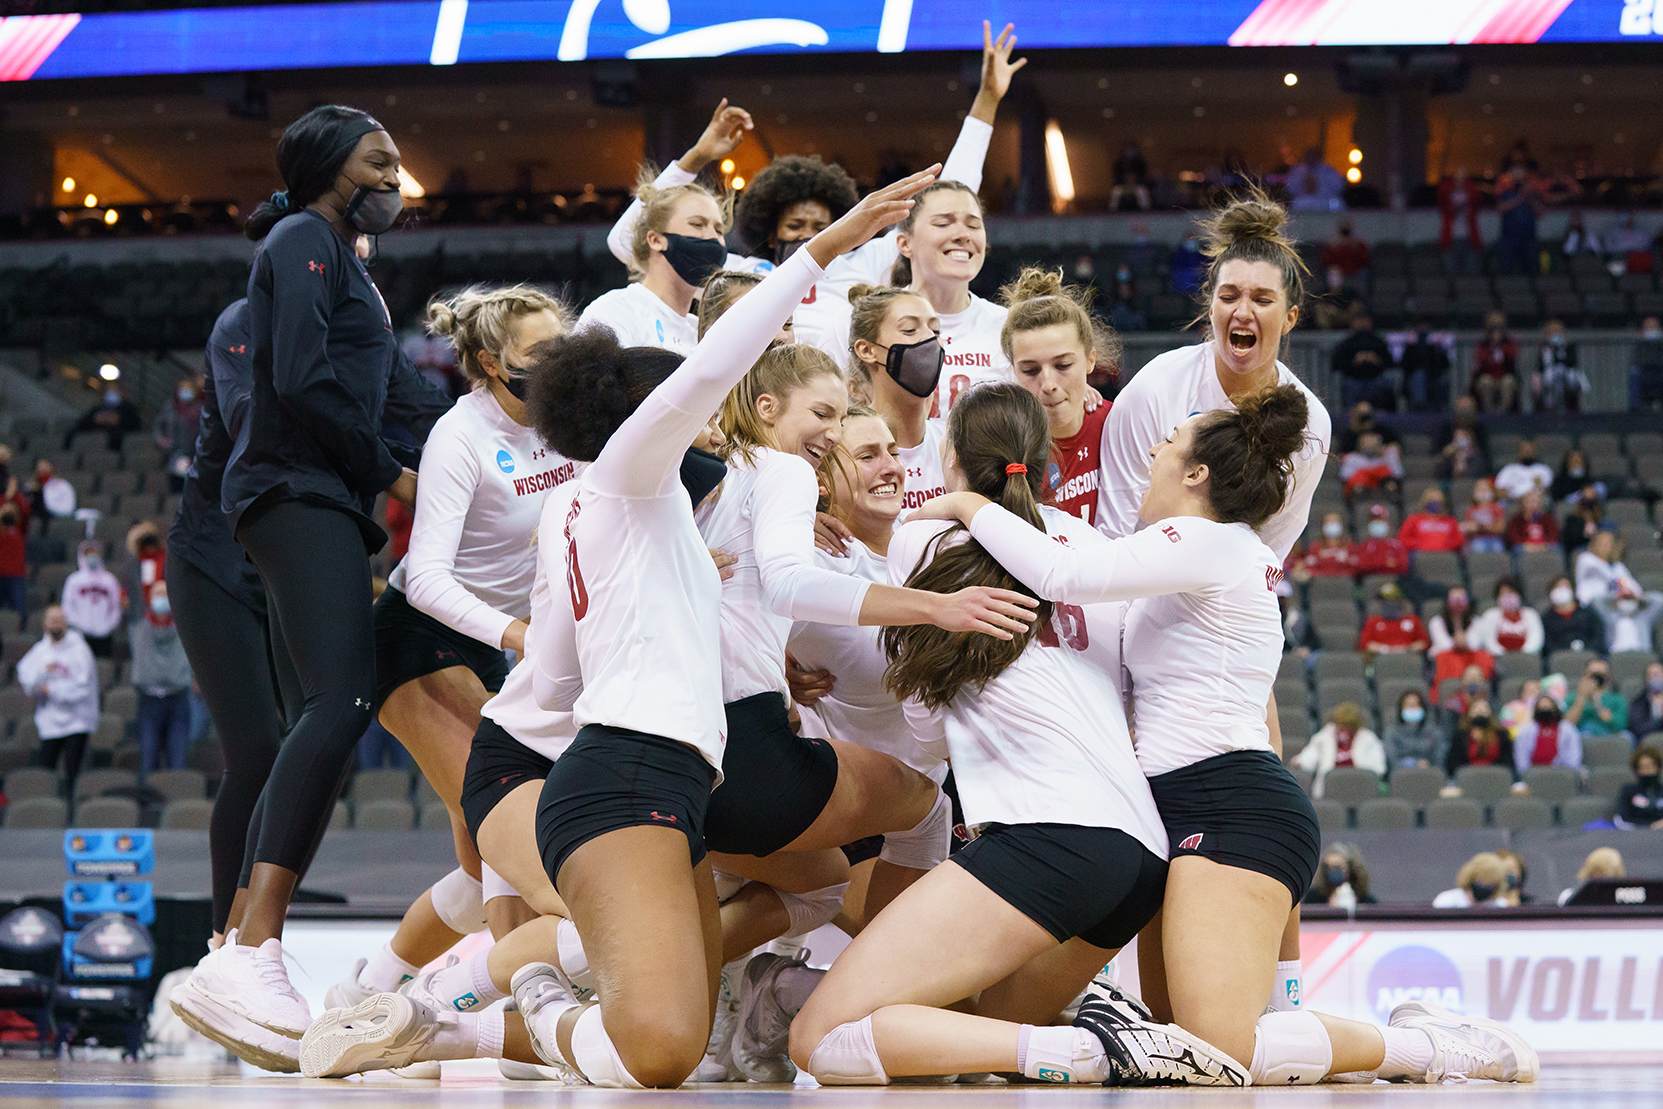 Badger volleyball win over Florida in the NCAA Regional 20-21 final.